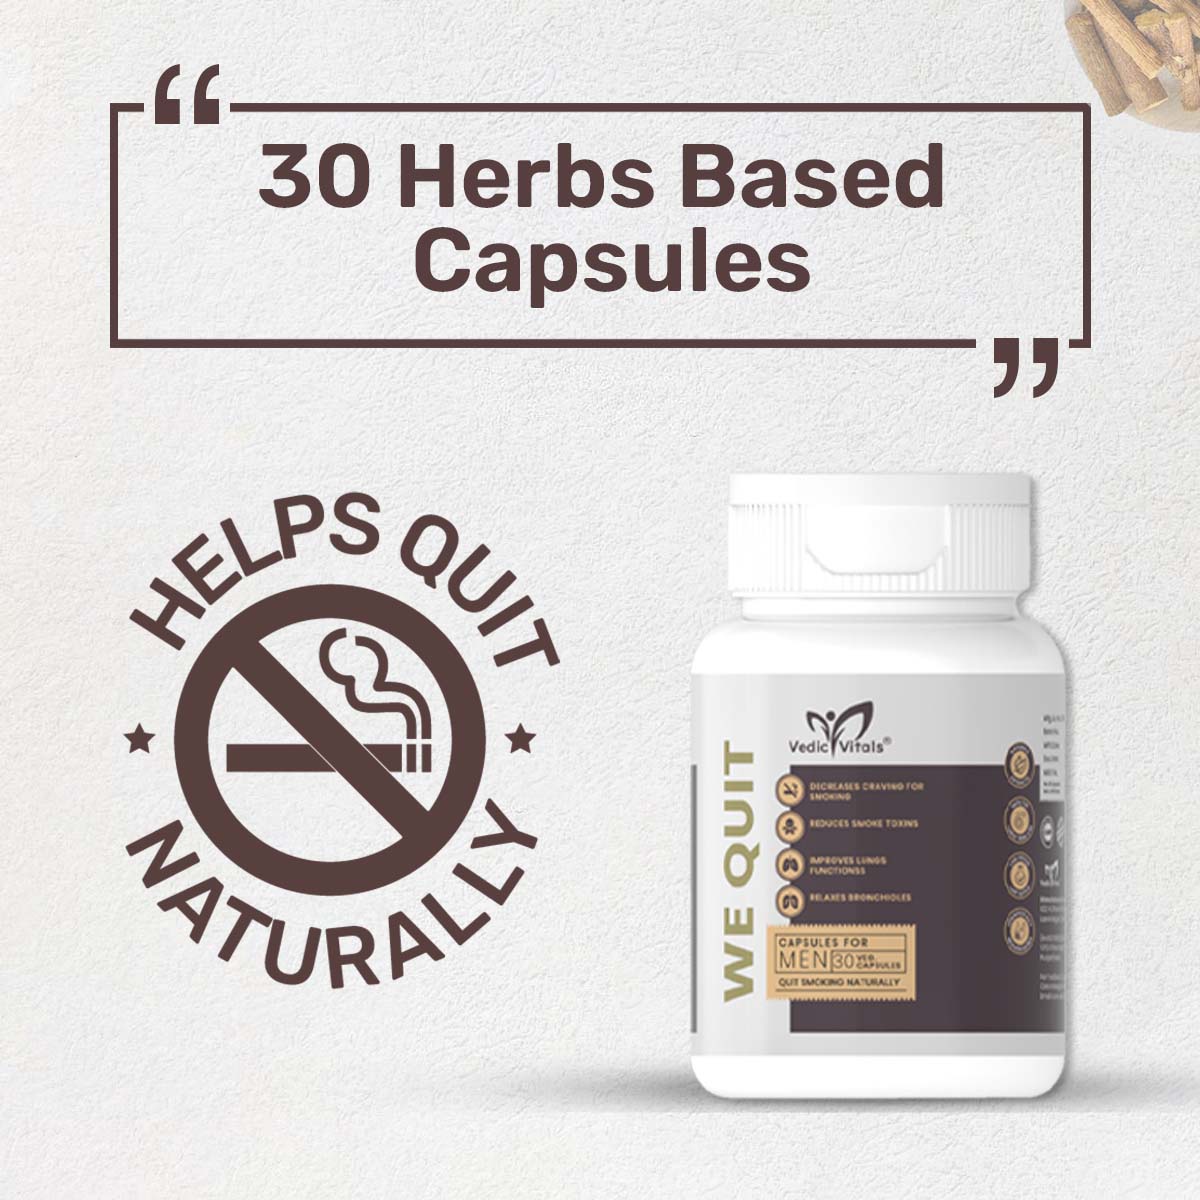 Vedic Vitals We Quit Capsules For Men I Helps quit smoking naturally